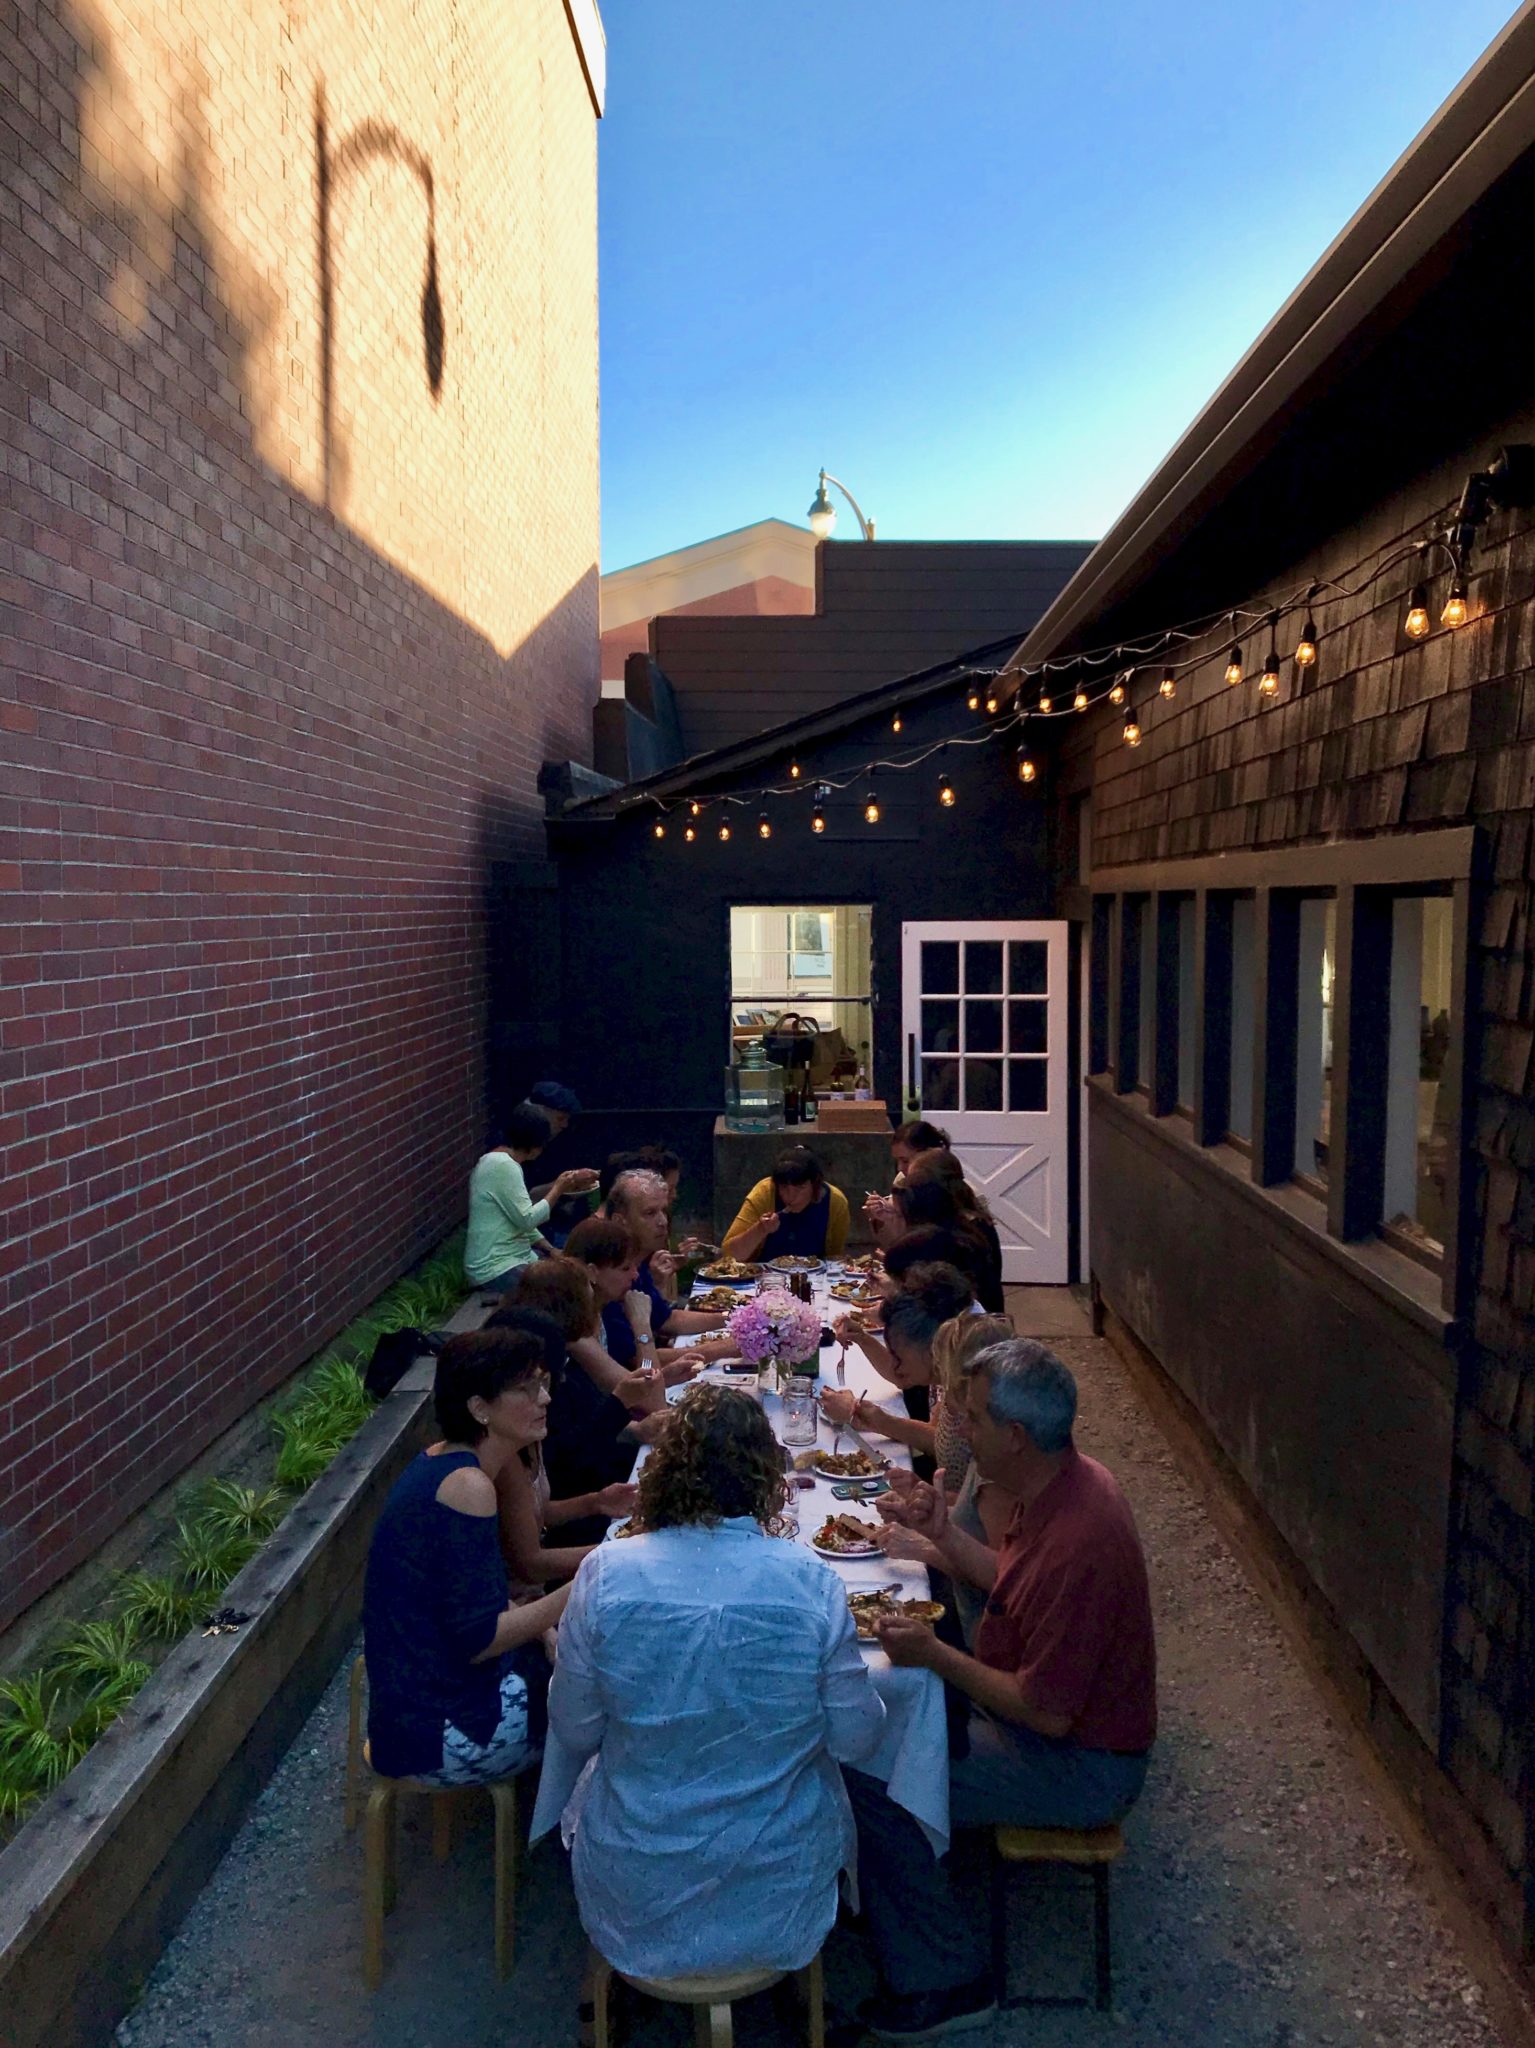 The Miracle Plum Cookbook Club enjoys a potluck dinner in June with dishes from Palestinian author Yasmin Khan's "Zaitoun" cookbook in the courtyard behind Miracle Plum. (Gwen Gunheim)